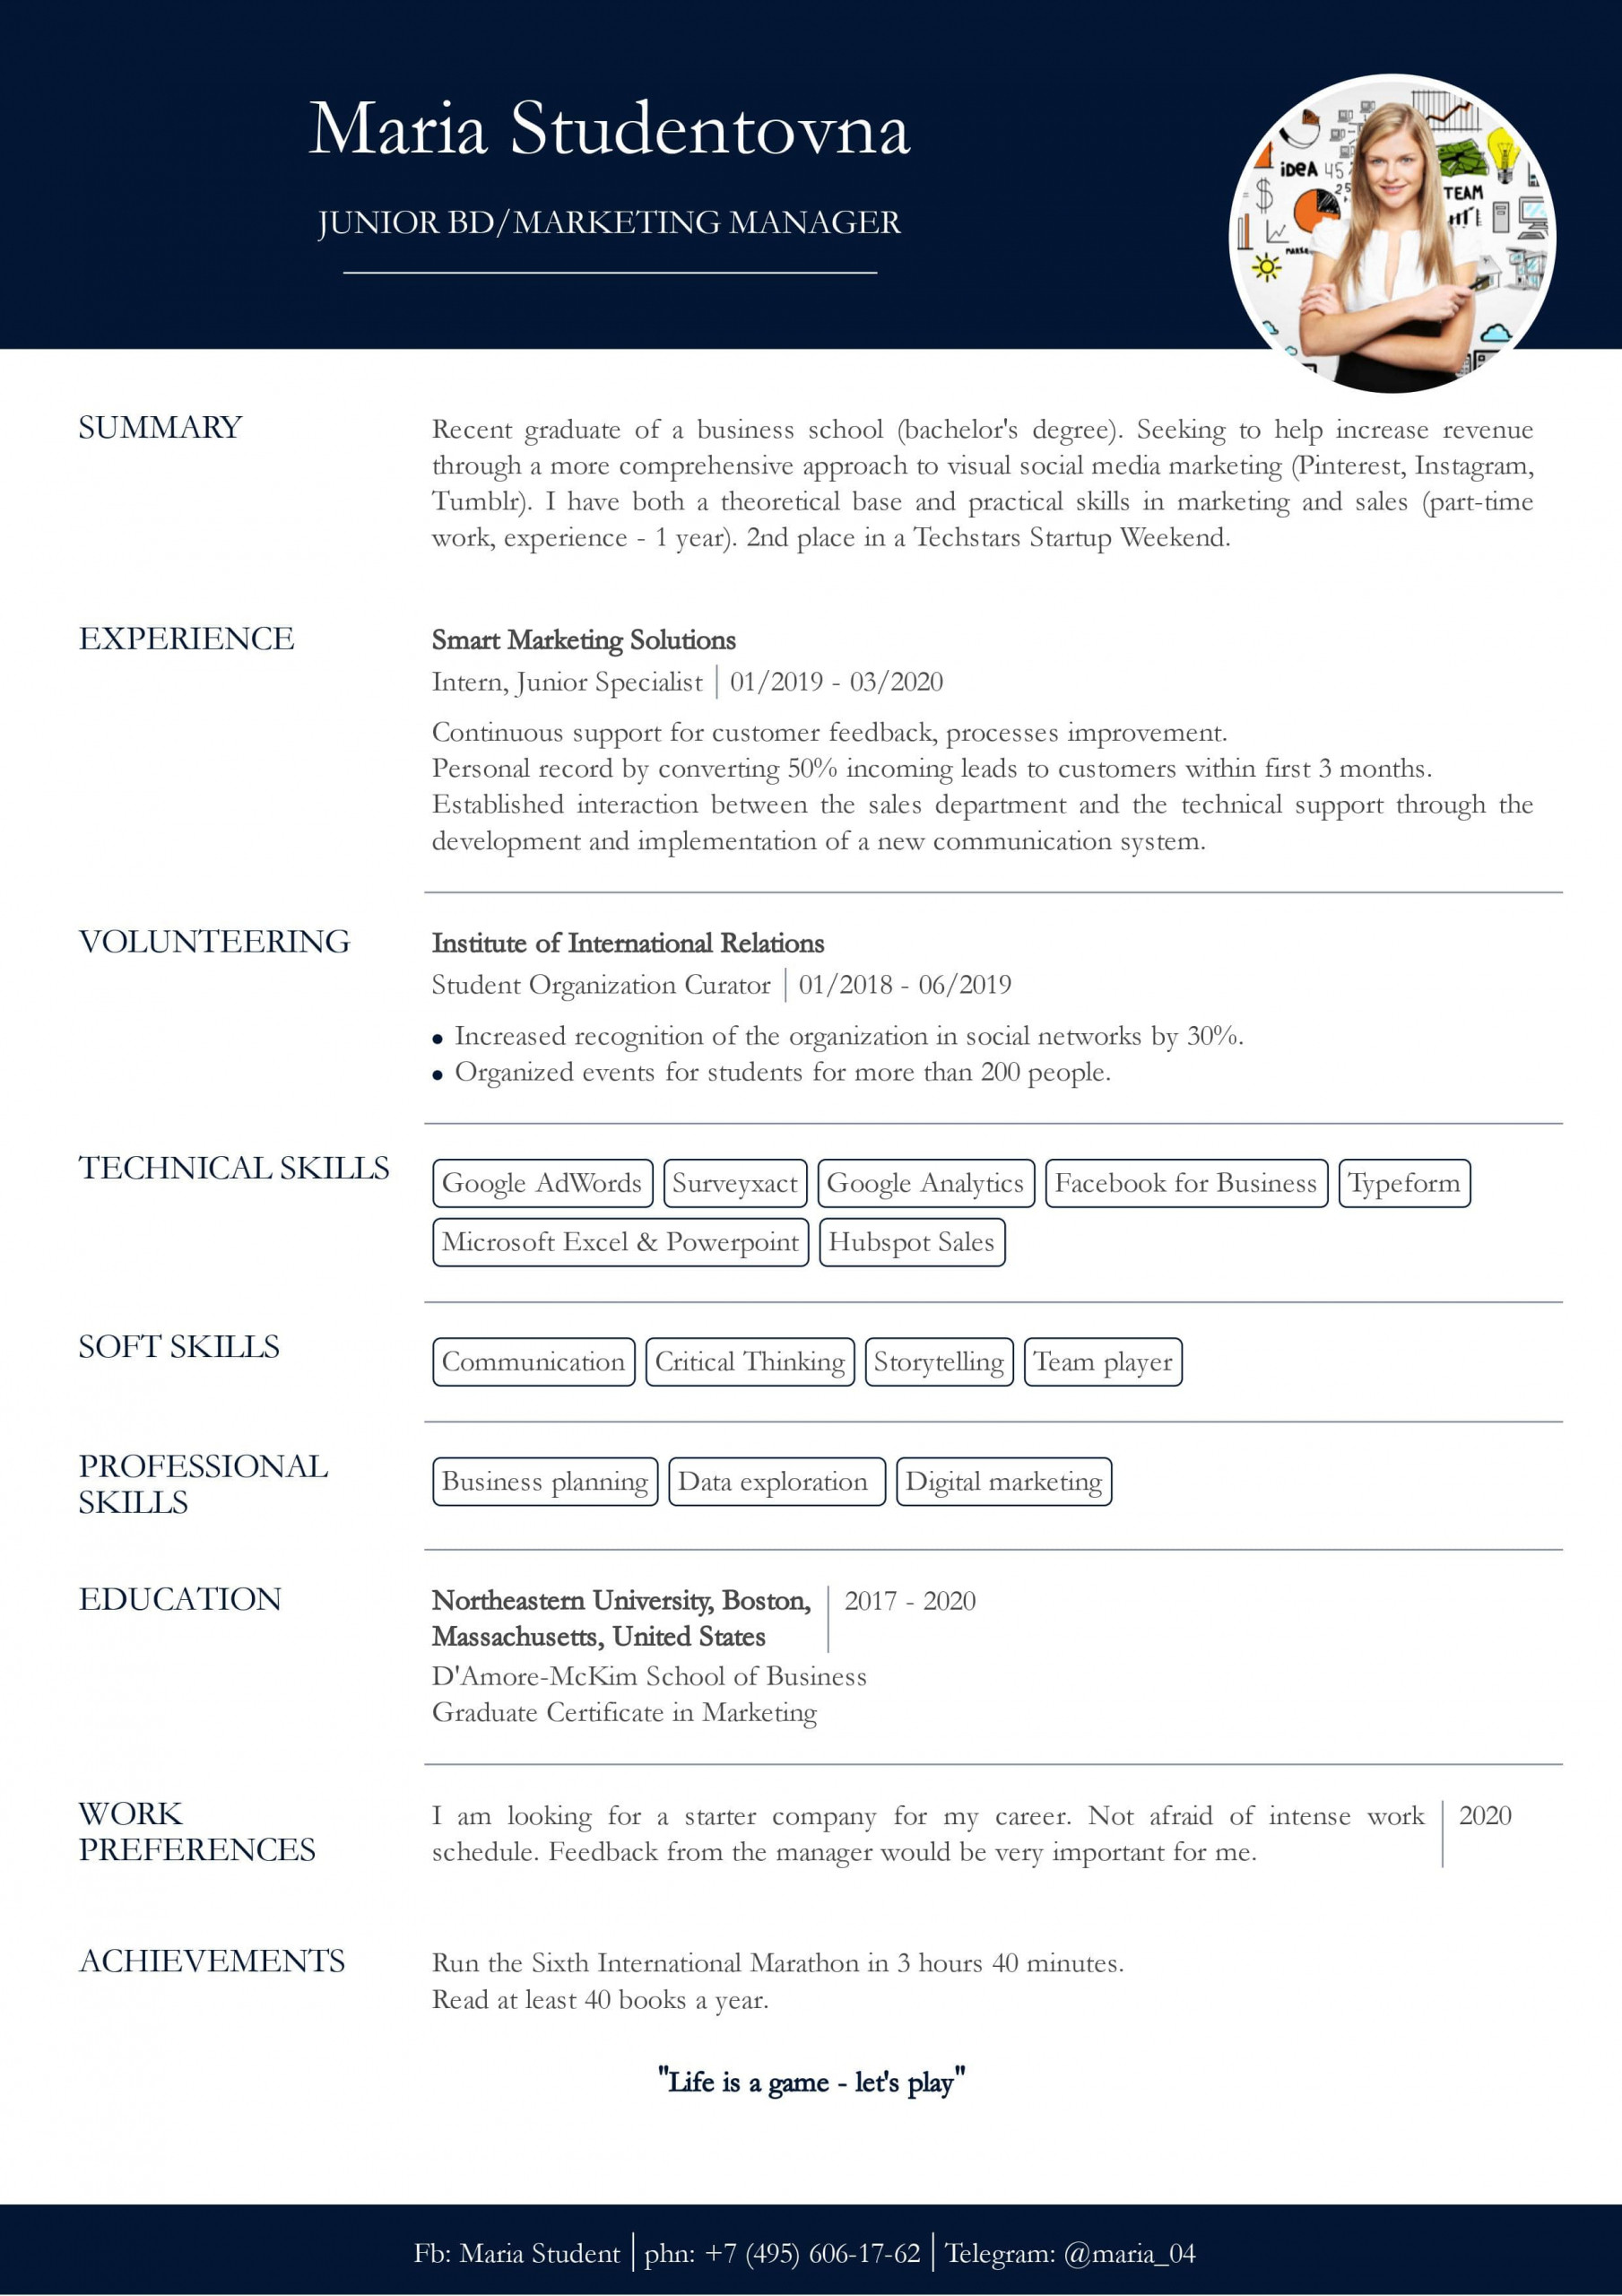 Sample Resume for No Working Experience Resume with No Work Experience. Sample for Students. – Cv2you Blog